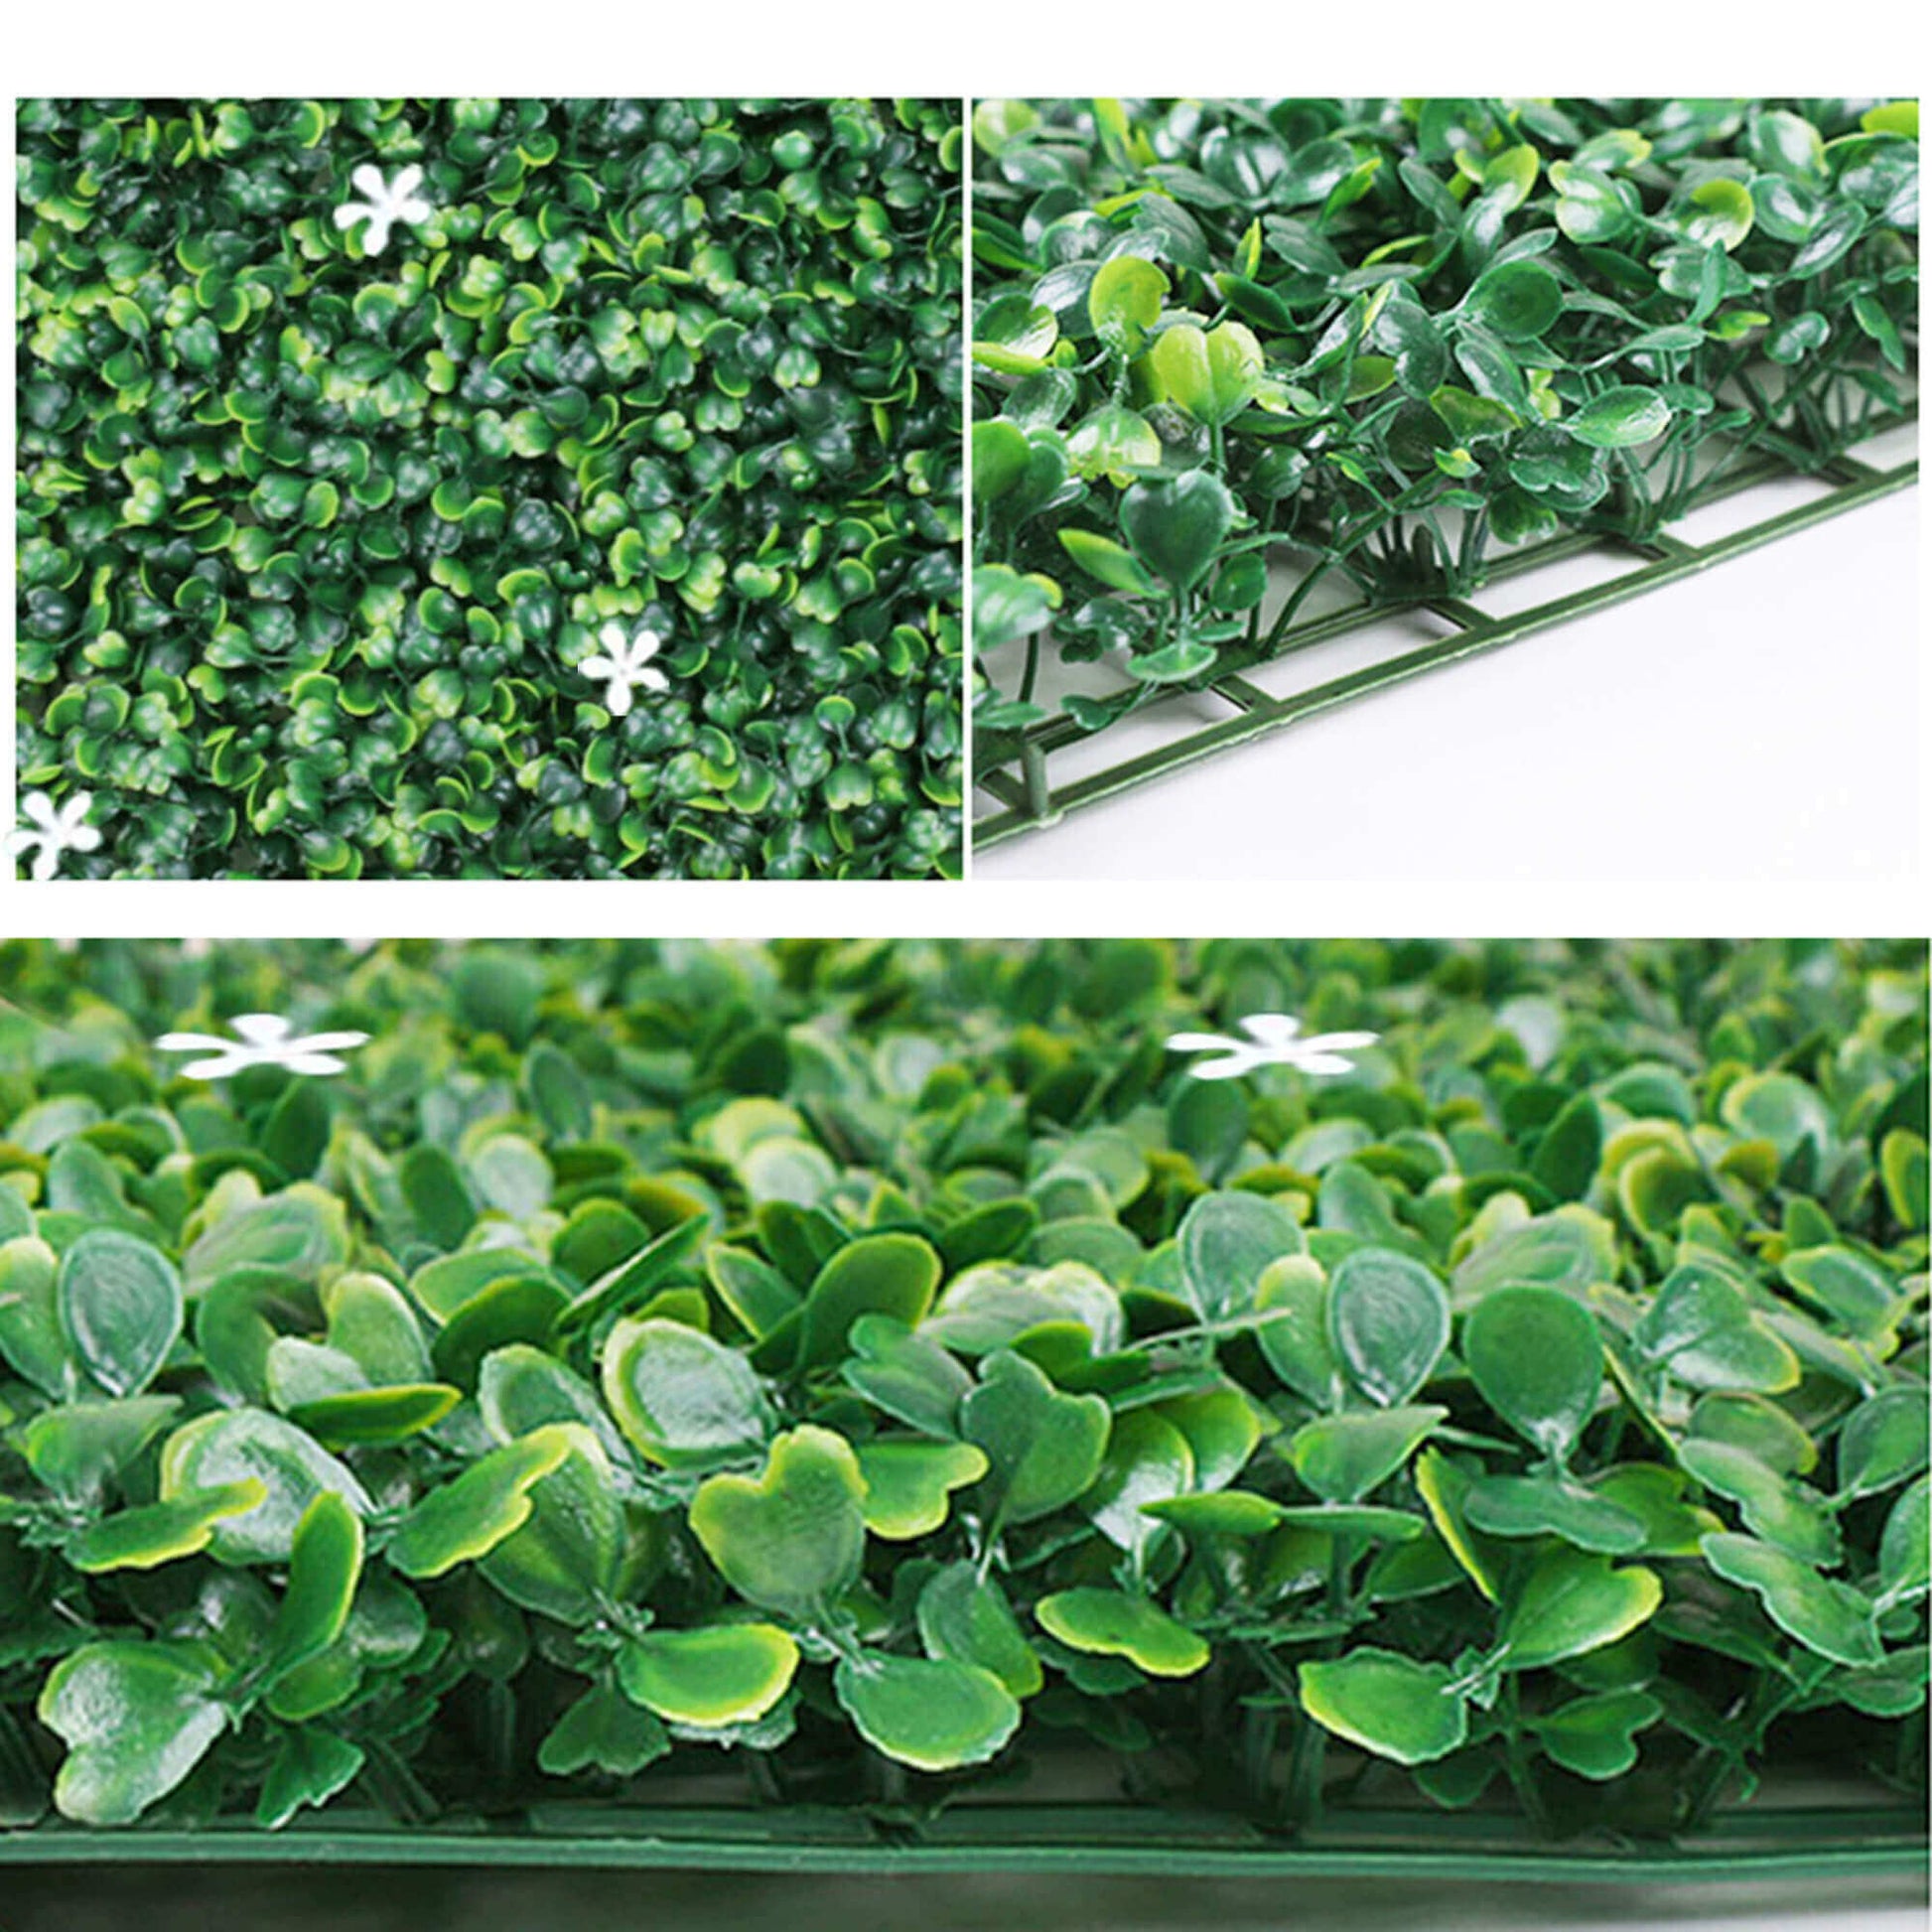 Artificial Hedge Boxwood Panels Plant Faux Greenery Panels UV Protected Indoor Outdoor Garden Home Decor Greenery Panels Wall Pack of 6 Pieces